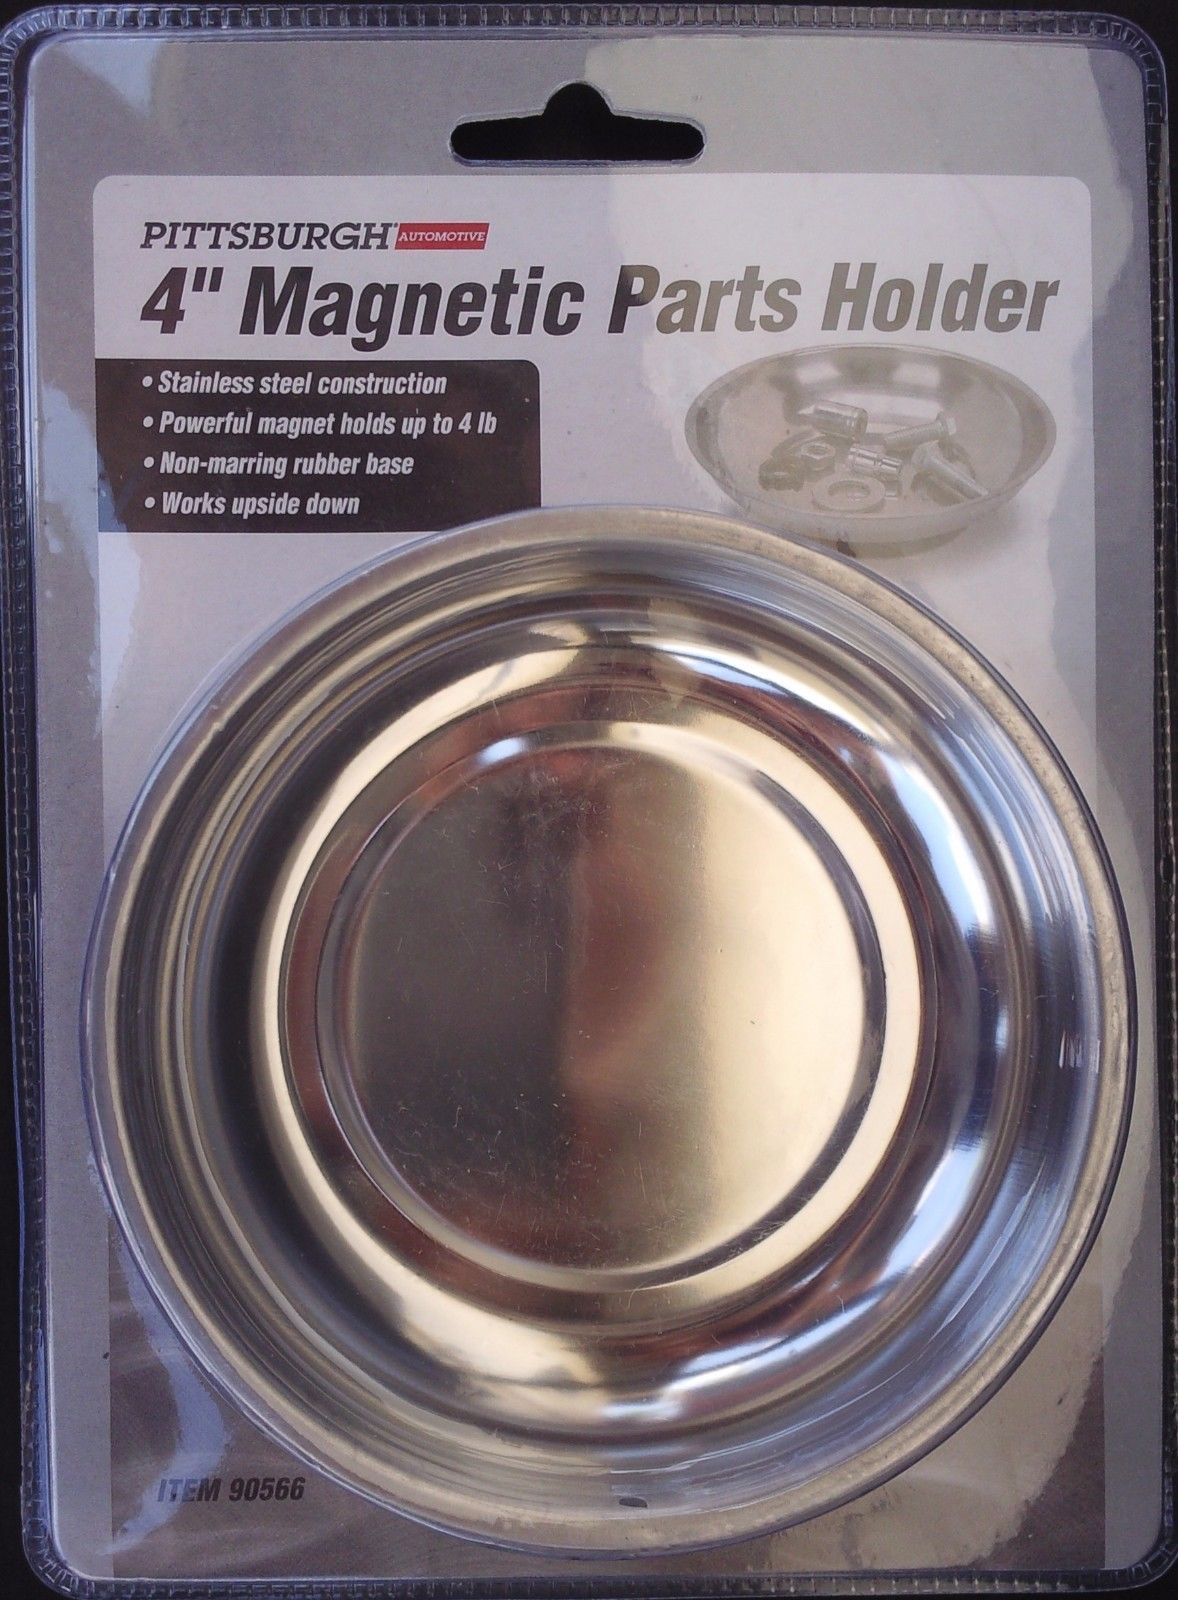 4" Magnetic Stainless Steel Parts Holder with Rubber base - $5.93